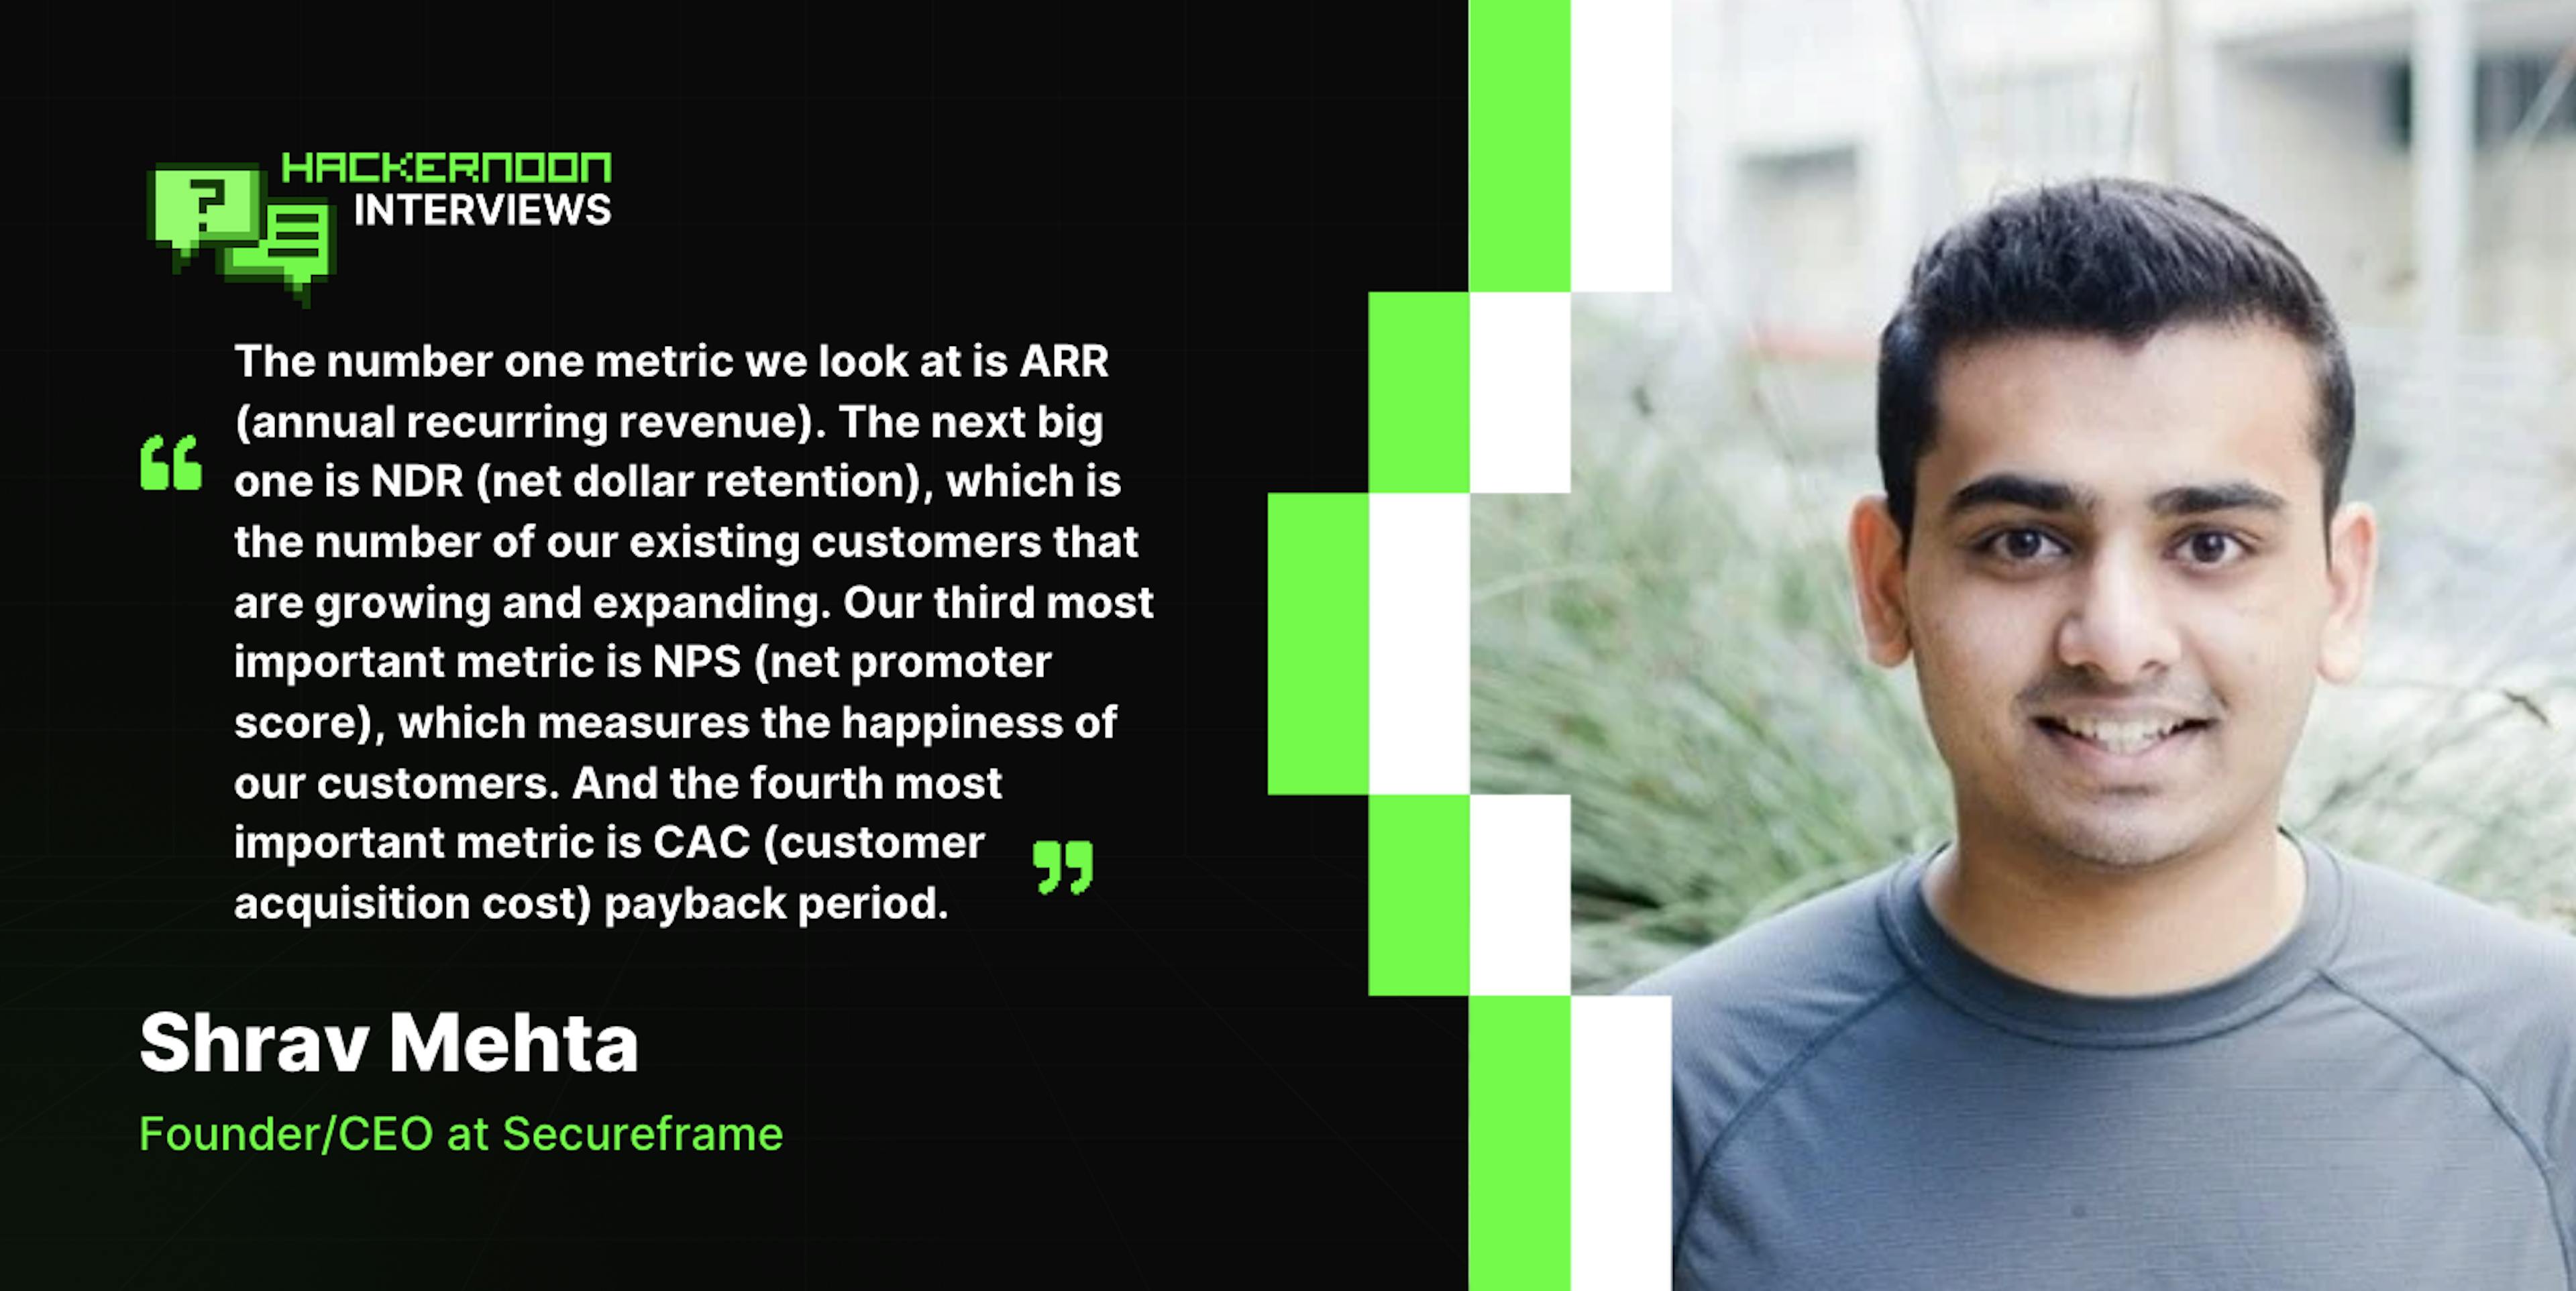 featured image - "Our Biggest Growth Goal is to Double our Revenue Year-over-Year," says Secureframe CEO Shrav Mehta